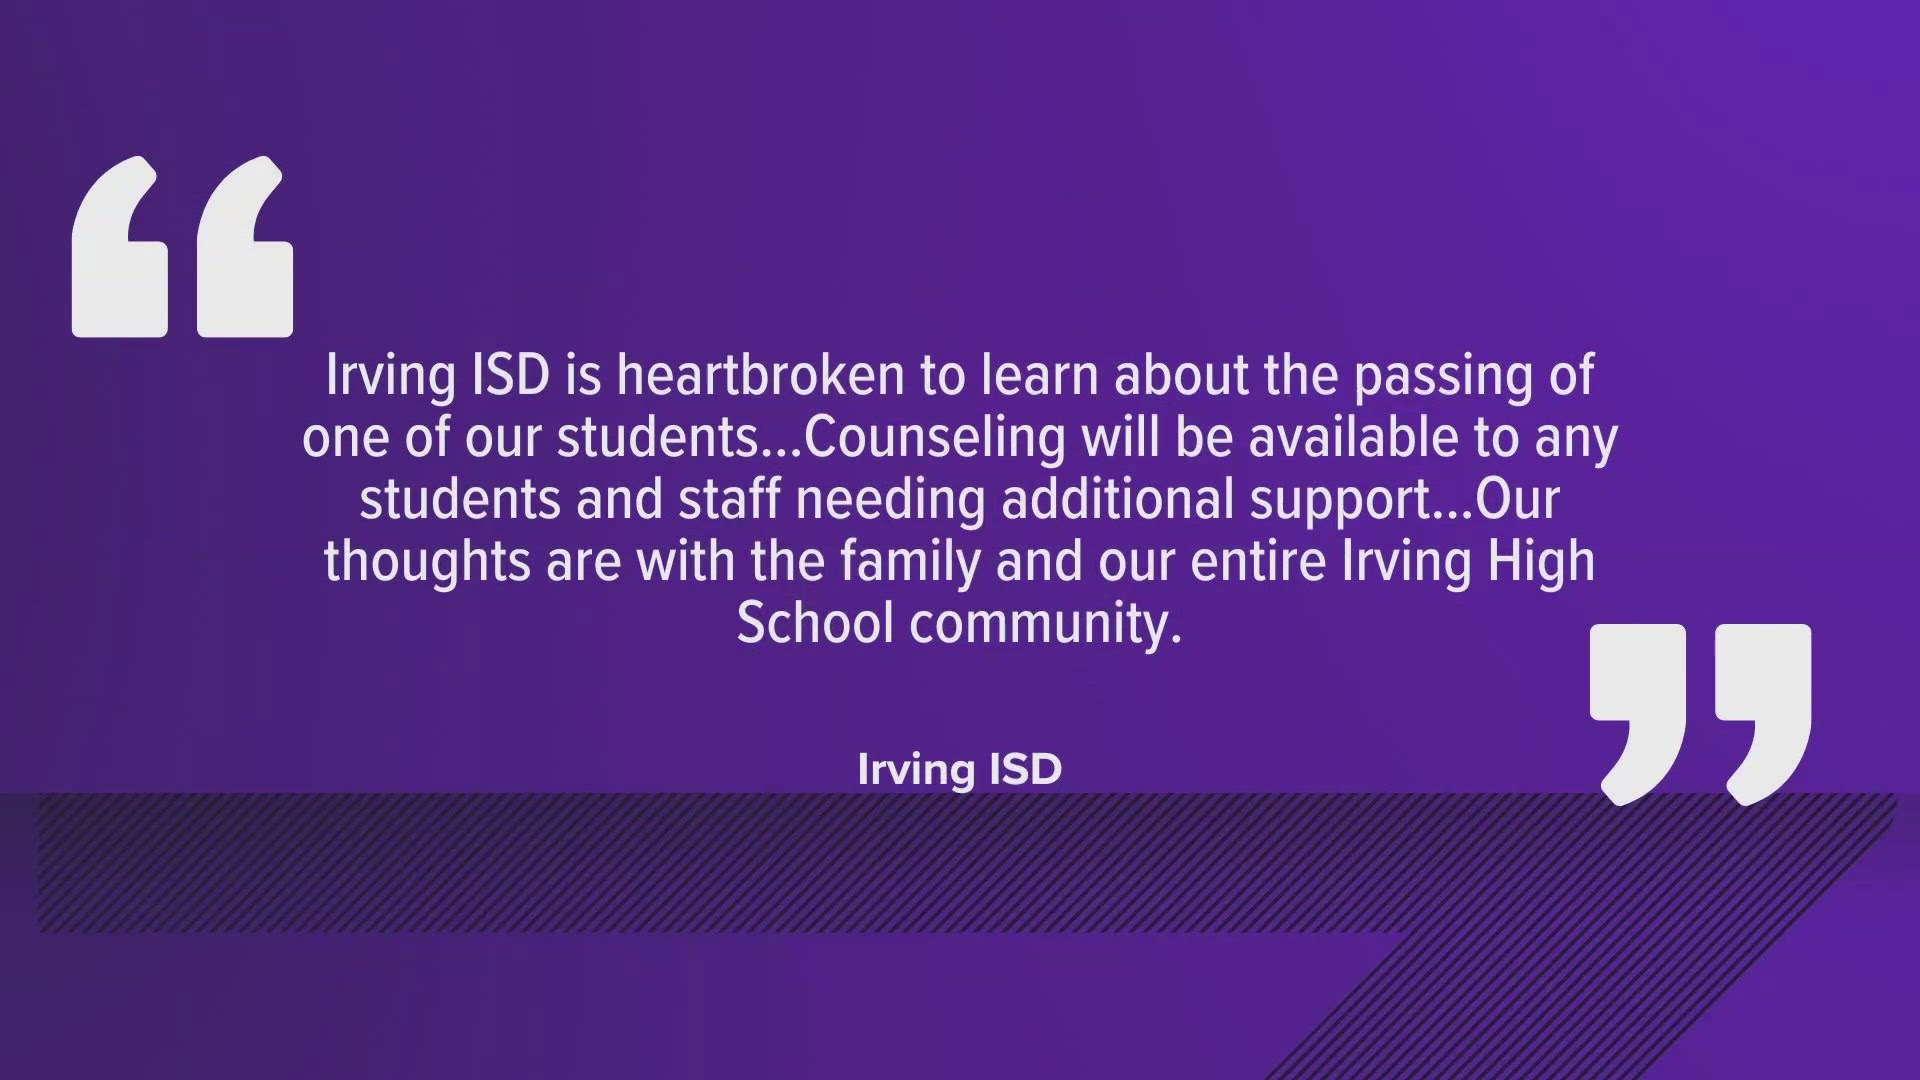 The 16-year-old victim of a hit-and-run in North Richland Hills was an Irving ISD student.